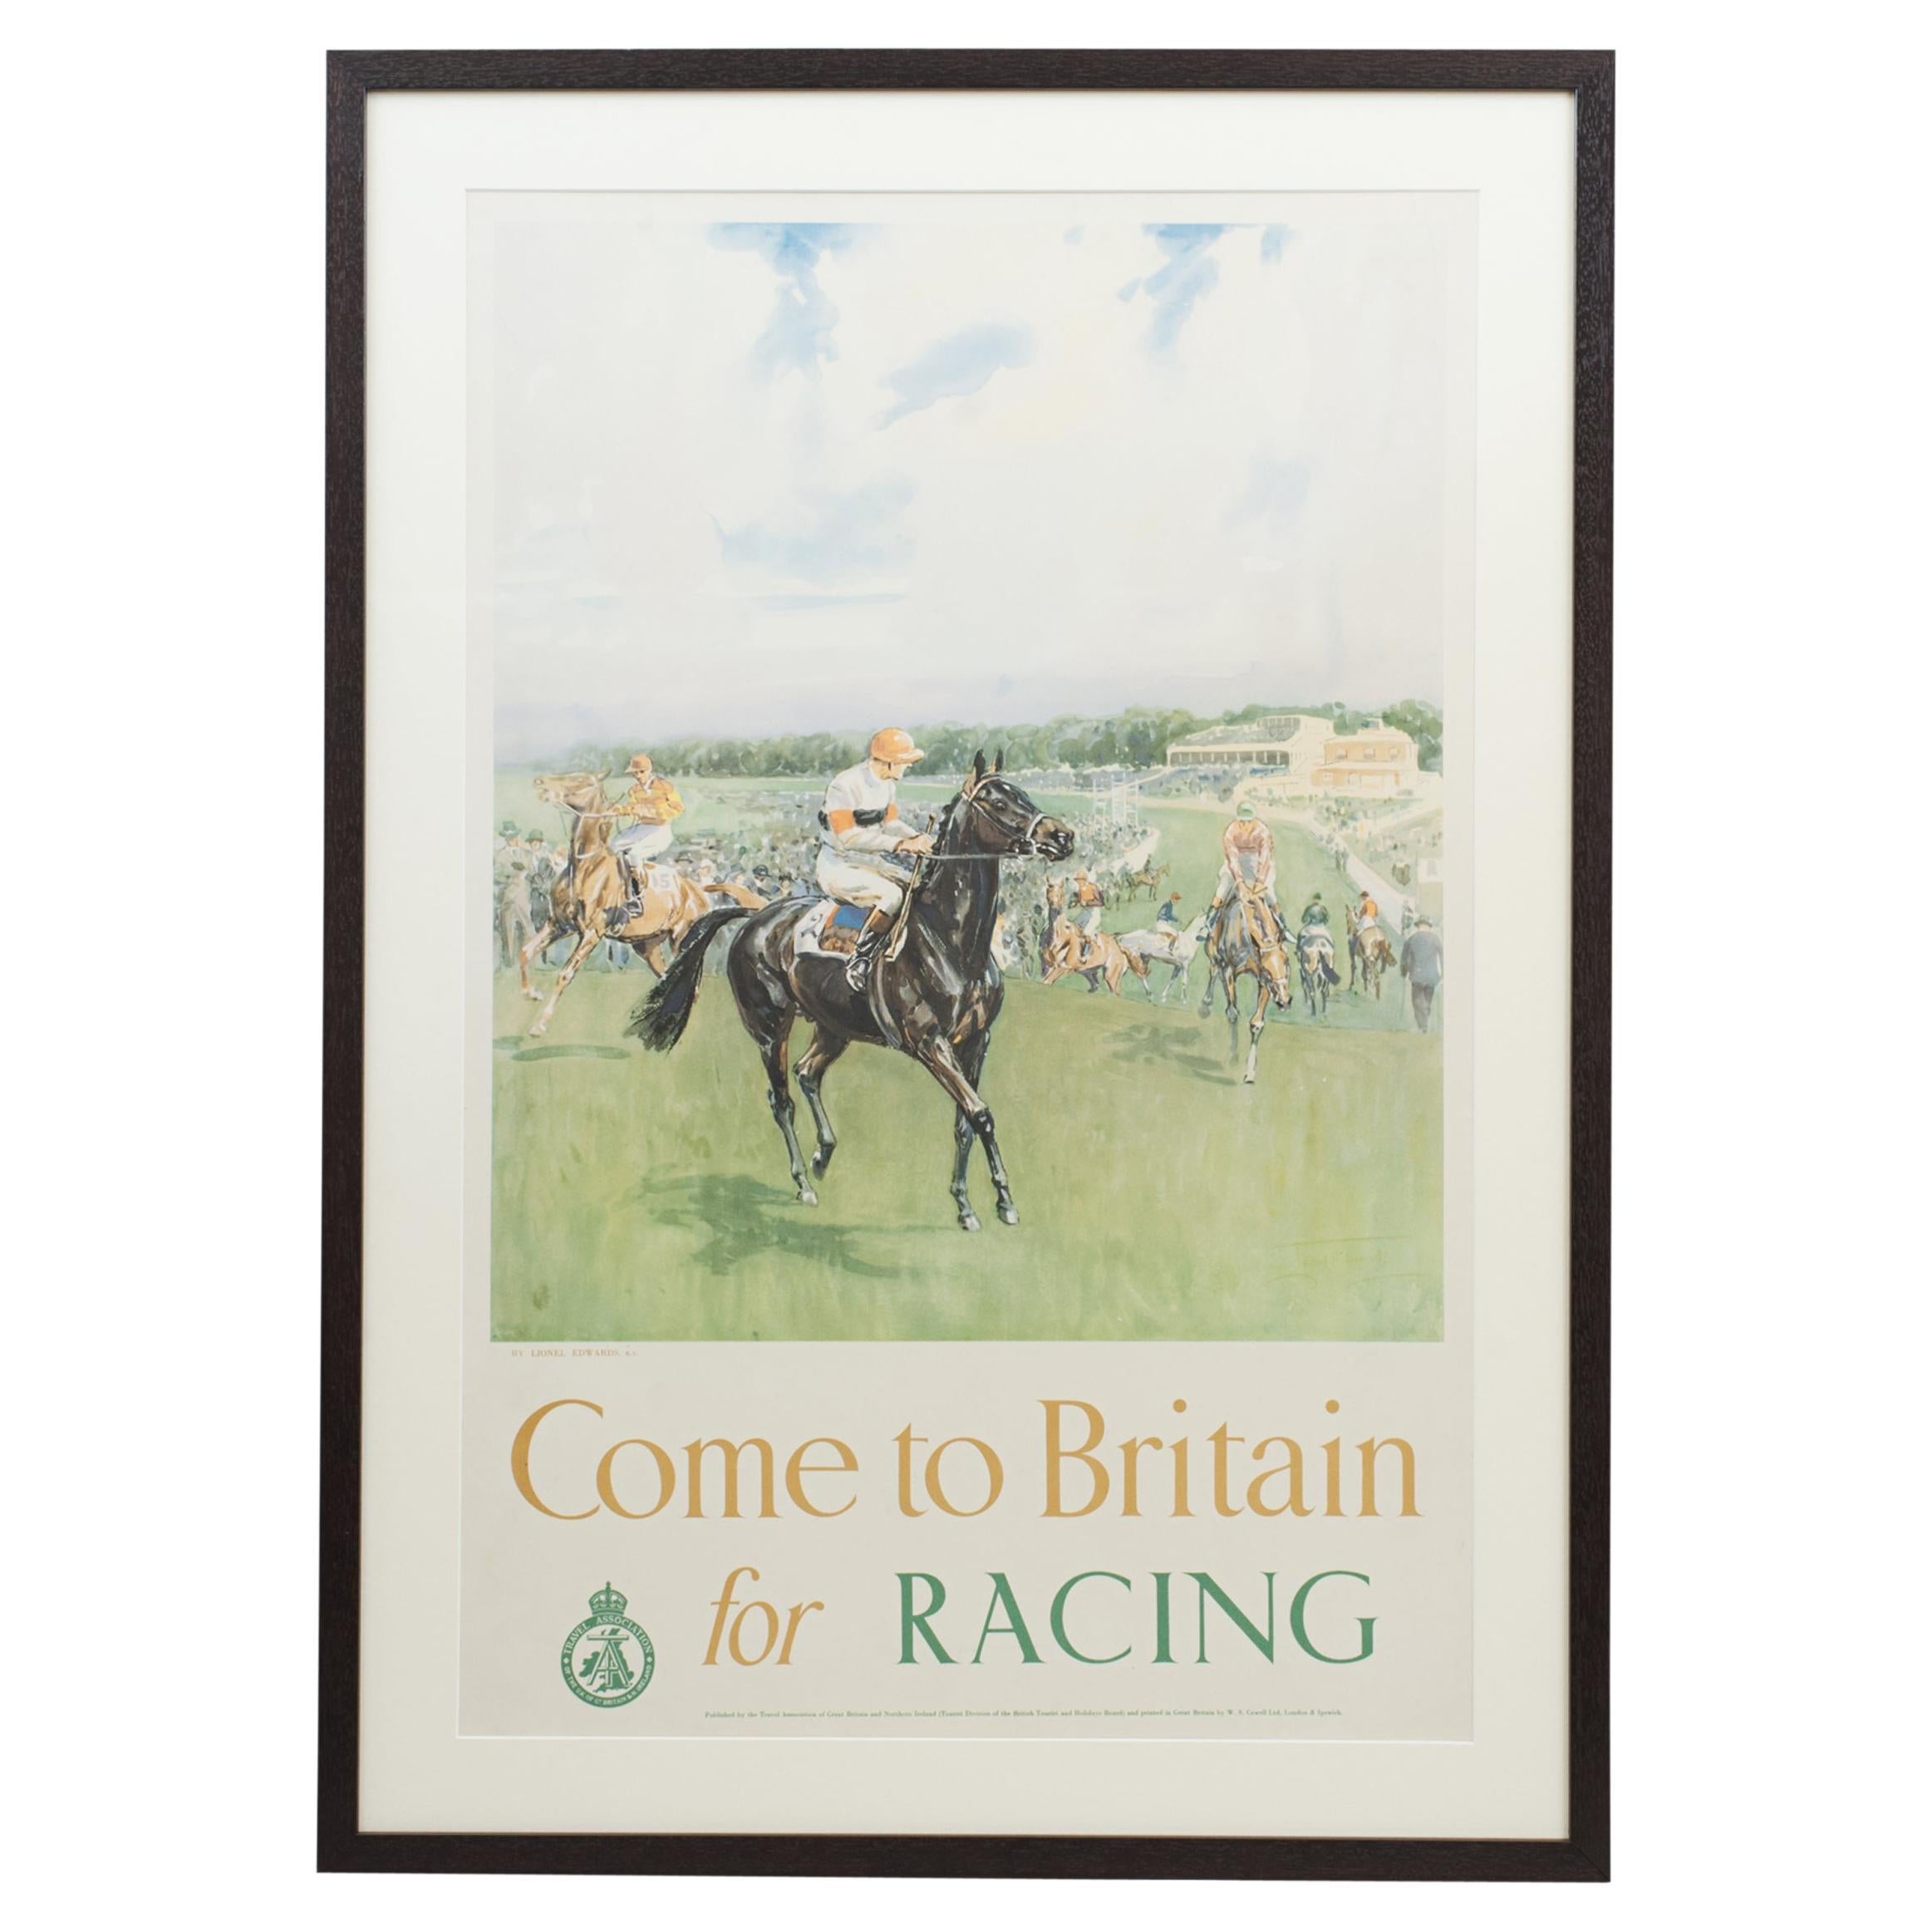 Reiseplakat von Lionel Edwards, Come to Britain for Racing, Poster